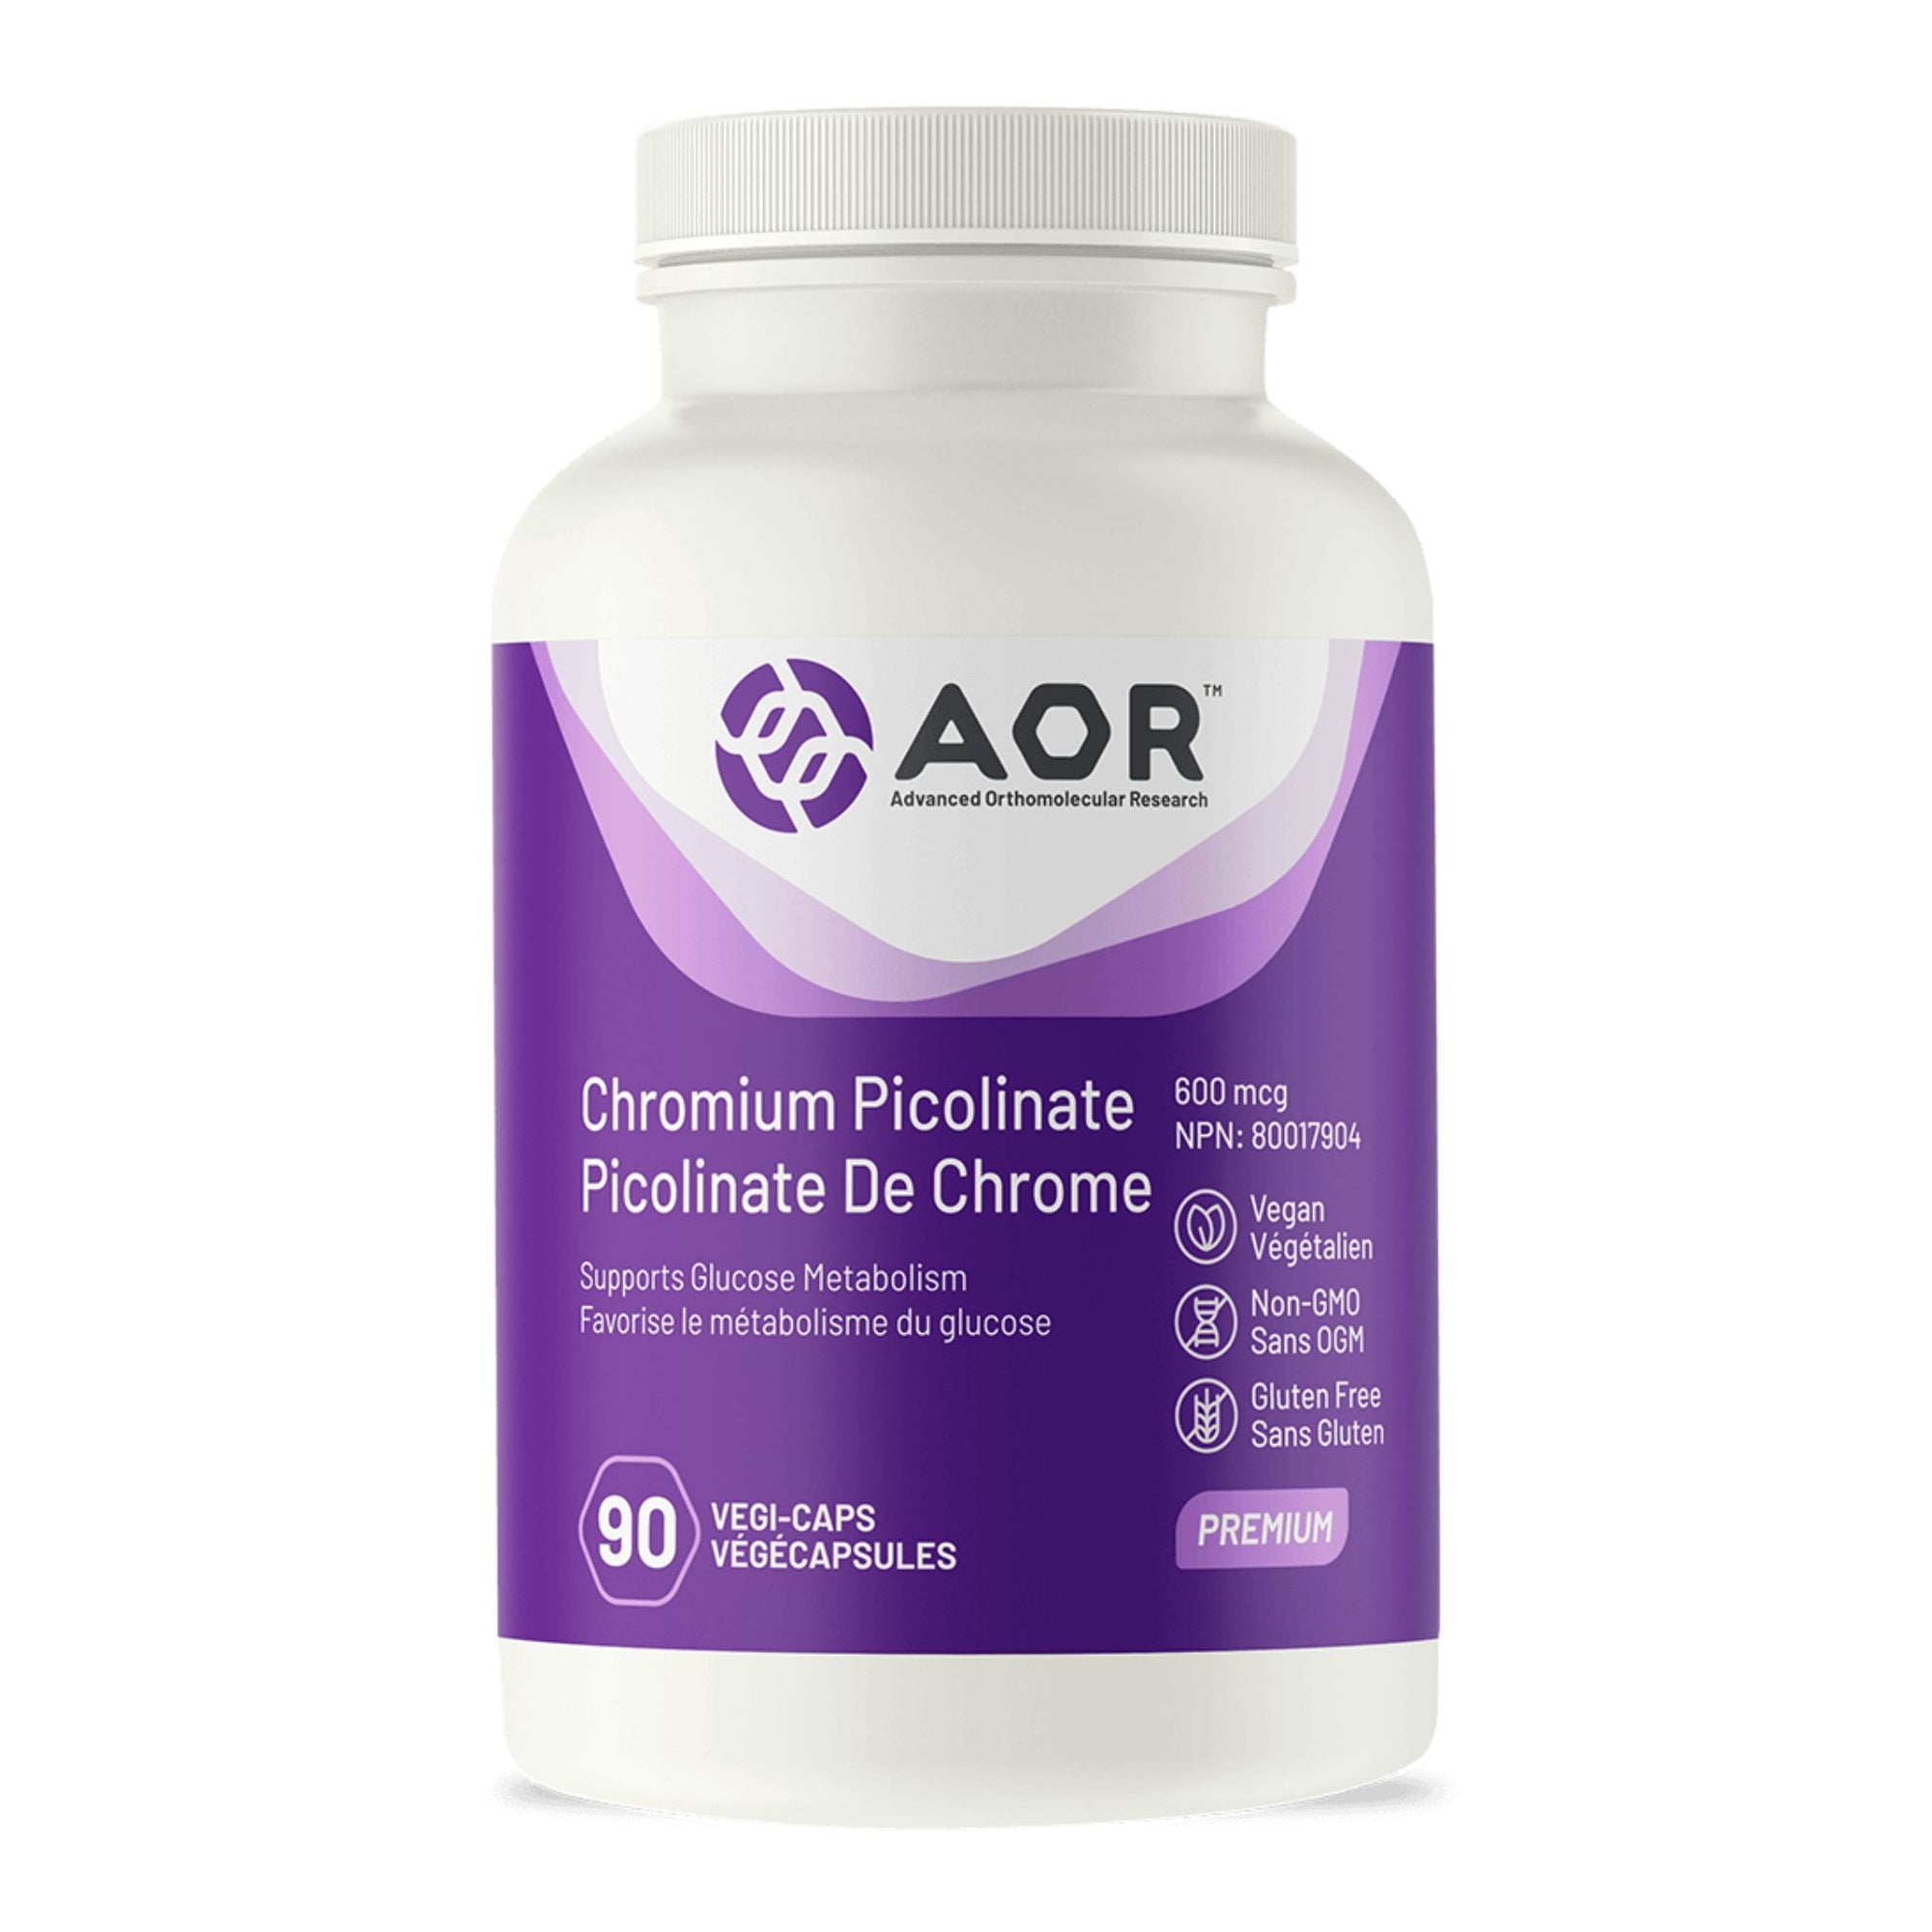 AOR Chromium Picolinate 90 Vegetable Capsules, 600 mcg - a supplement that supports Glucose Metabolism. 